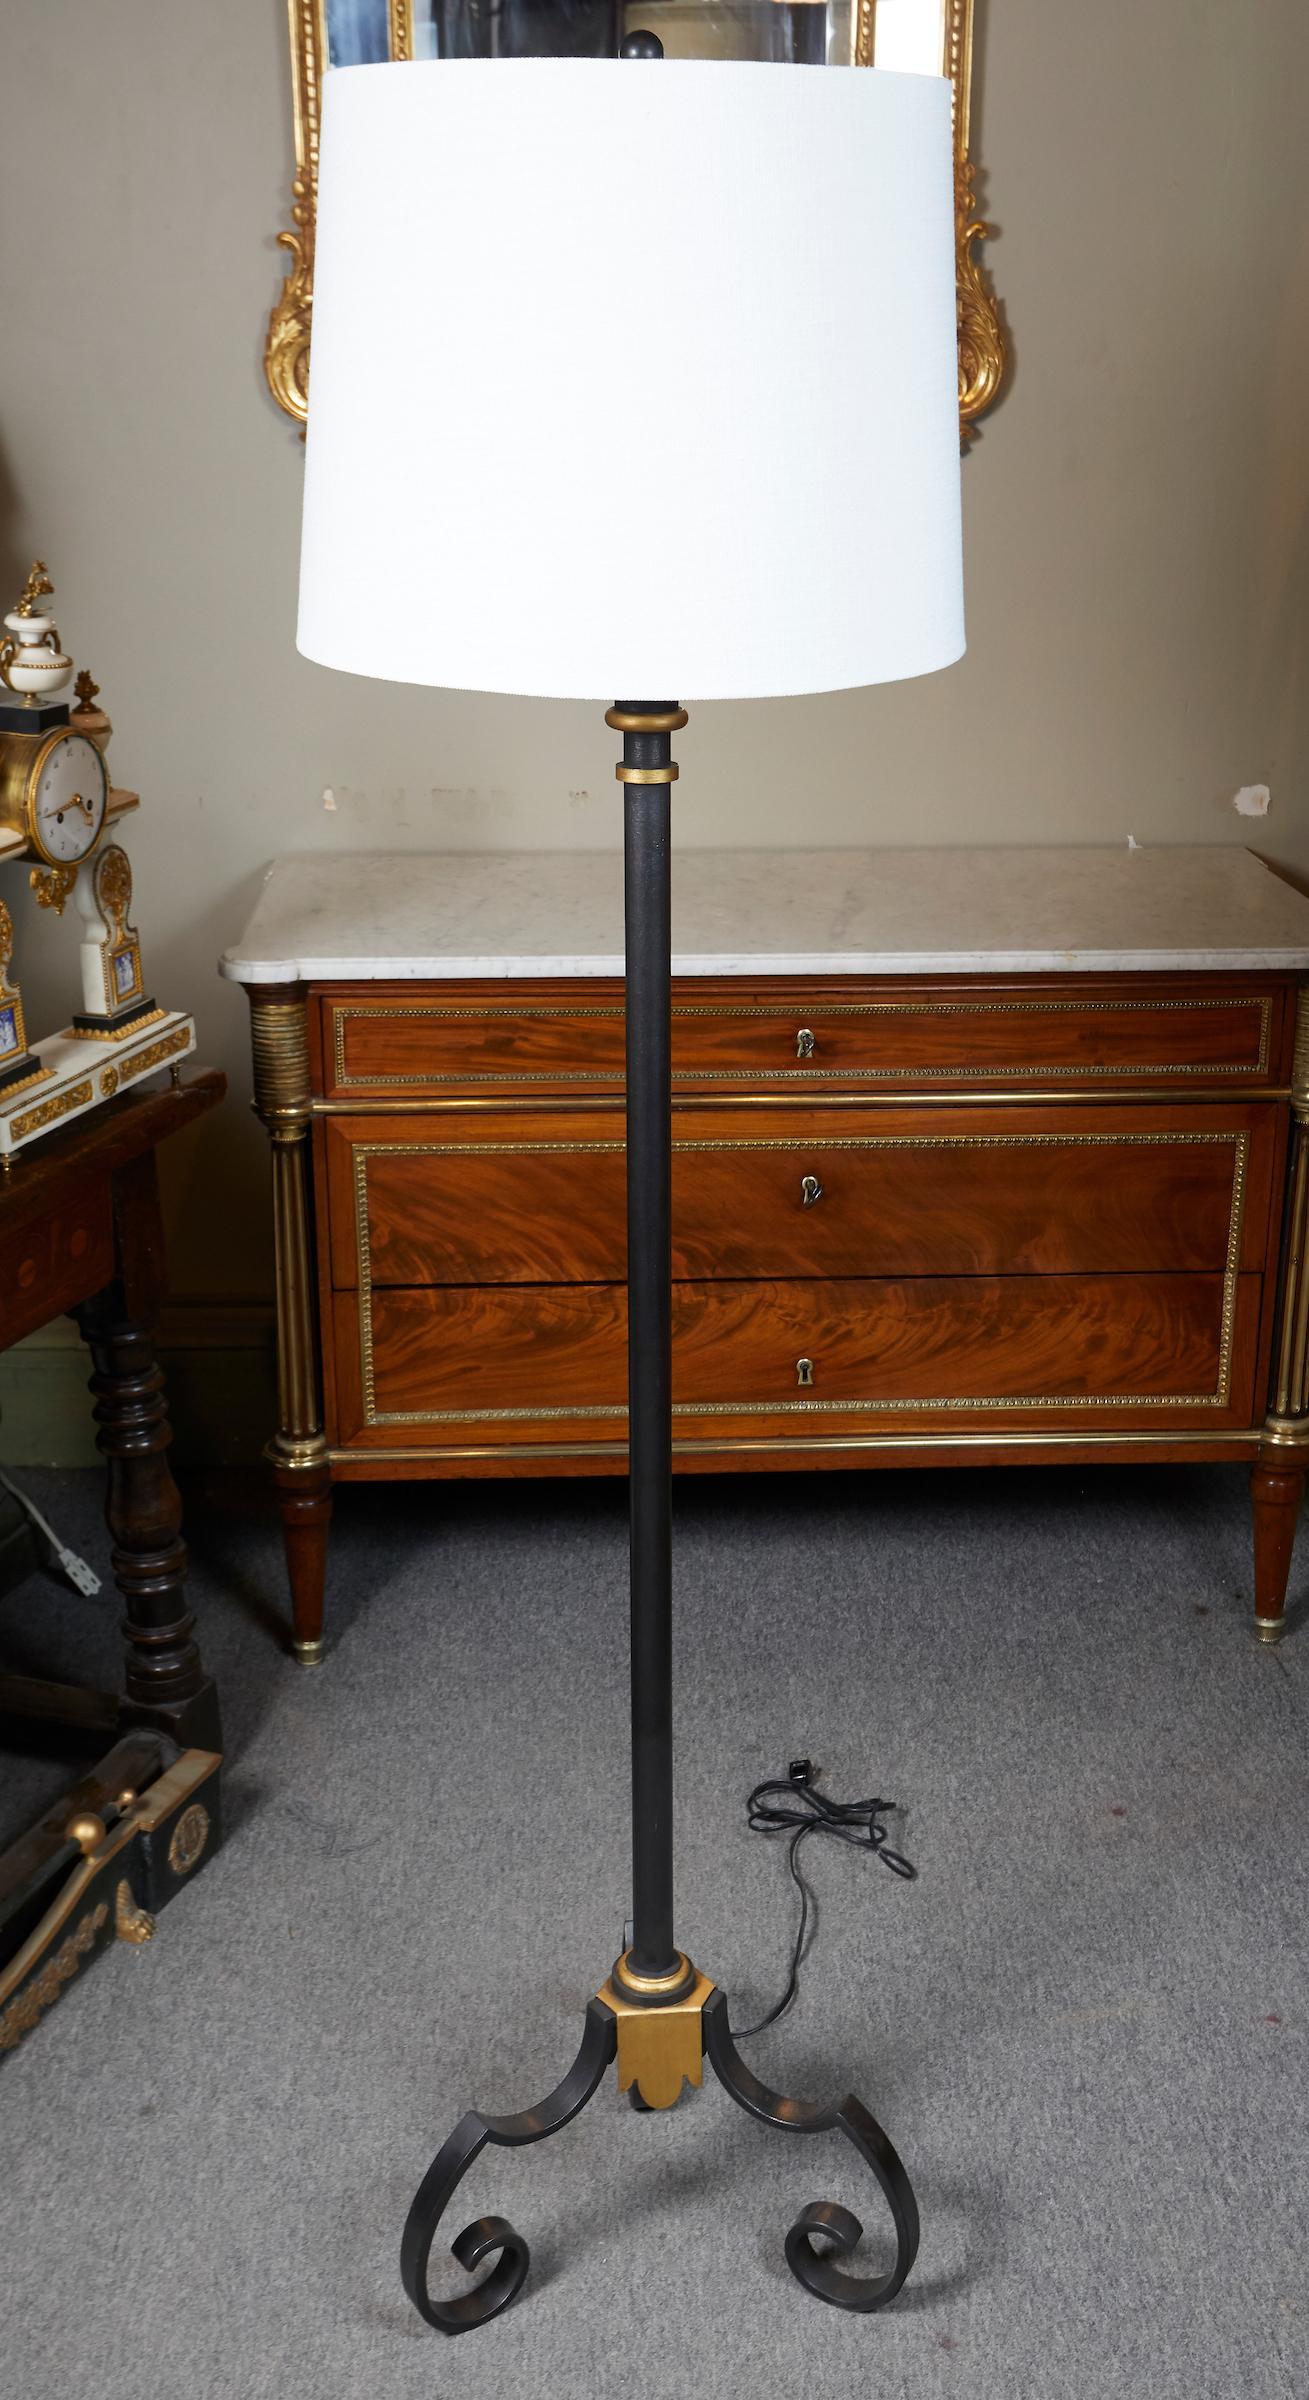 Mid-20th Century French 1940s Patinated Iron and Gilt Floor Lamp